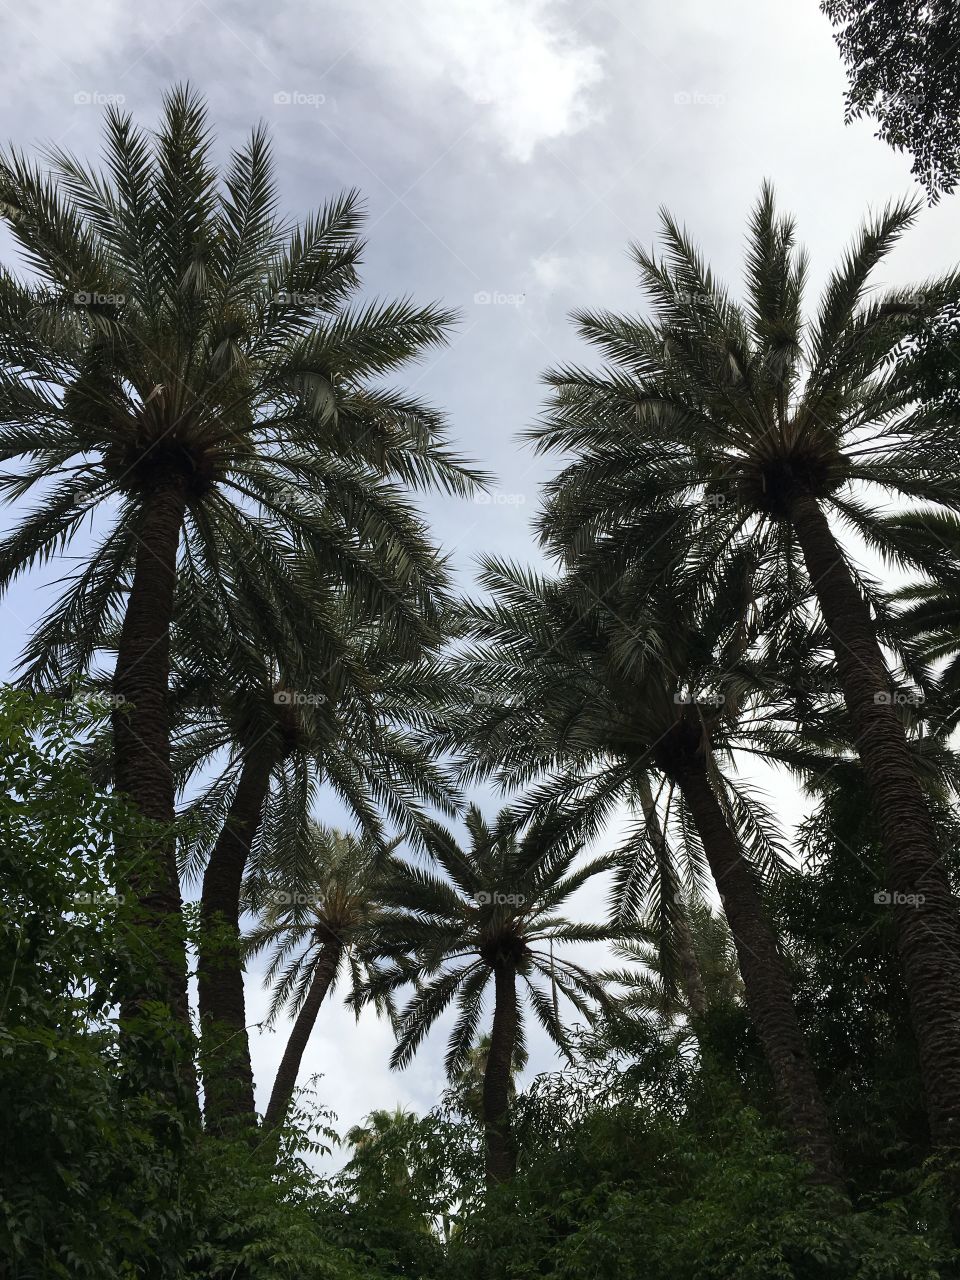 Palm Trees in Morocco 